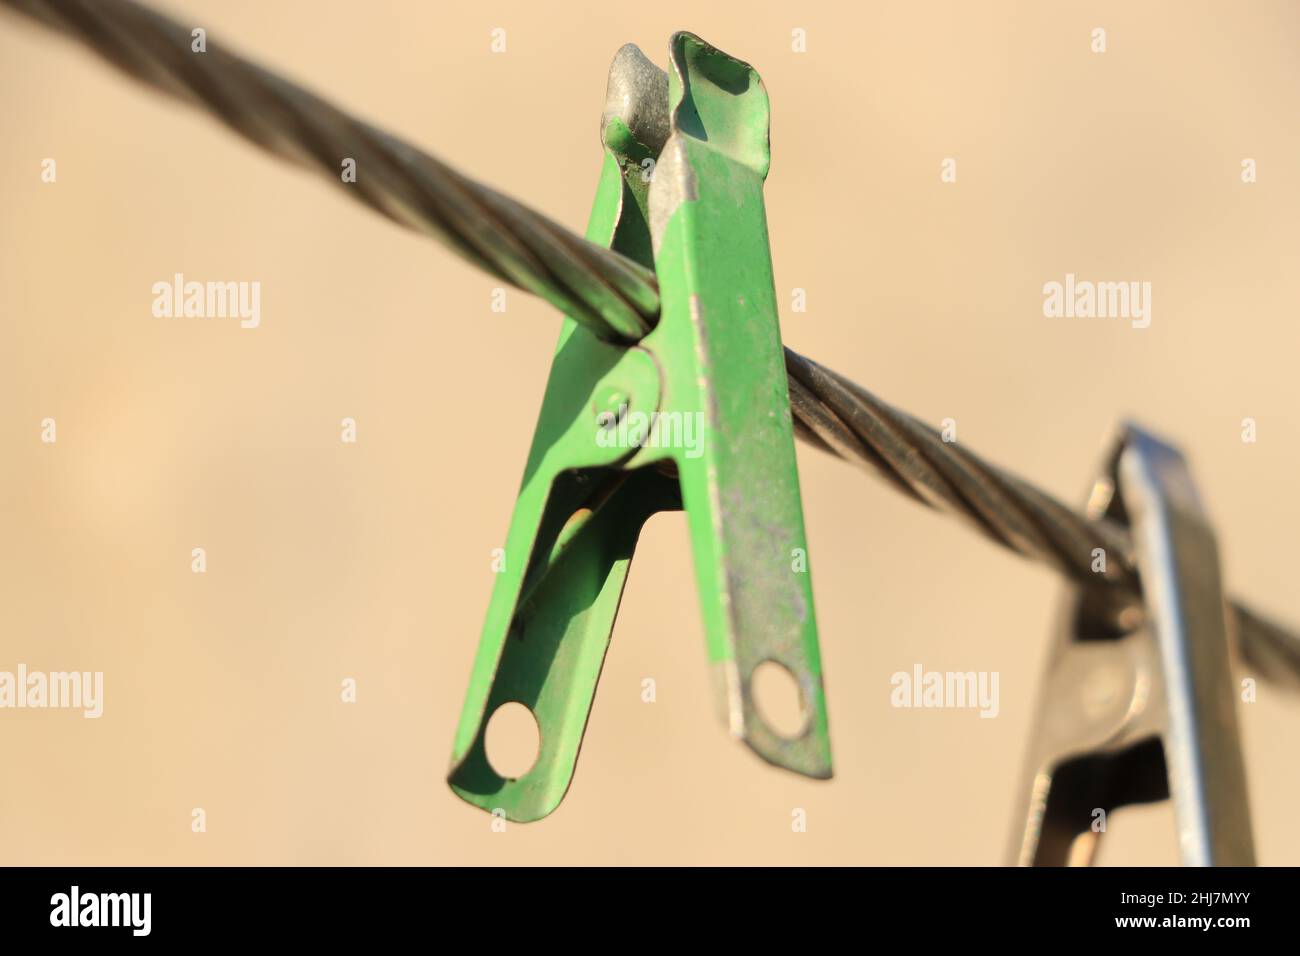 clothes pin hanging on wire. Stock Photo